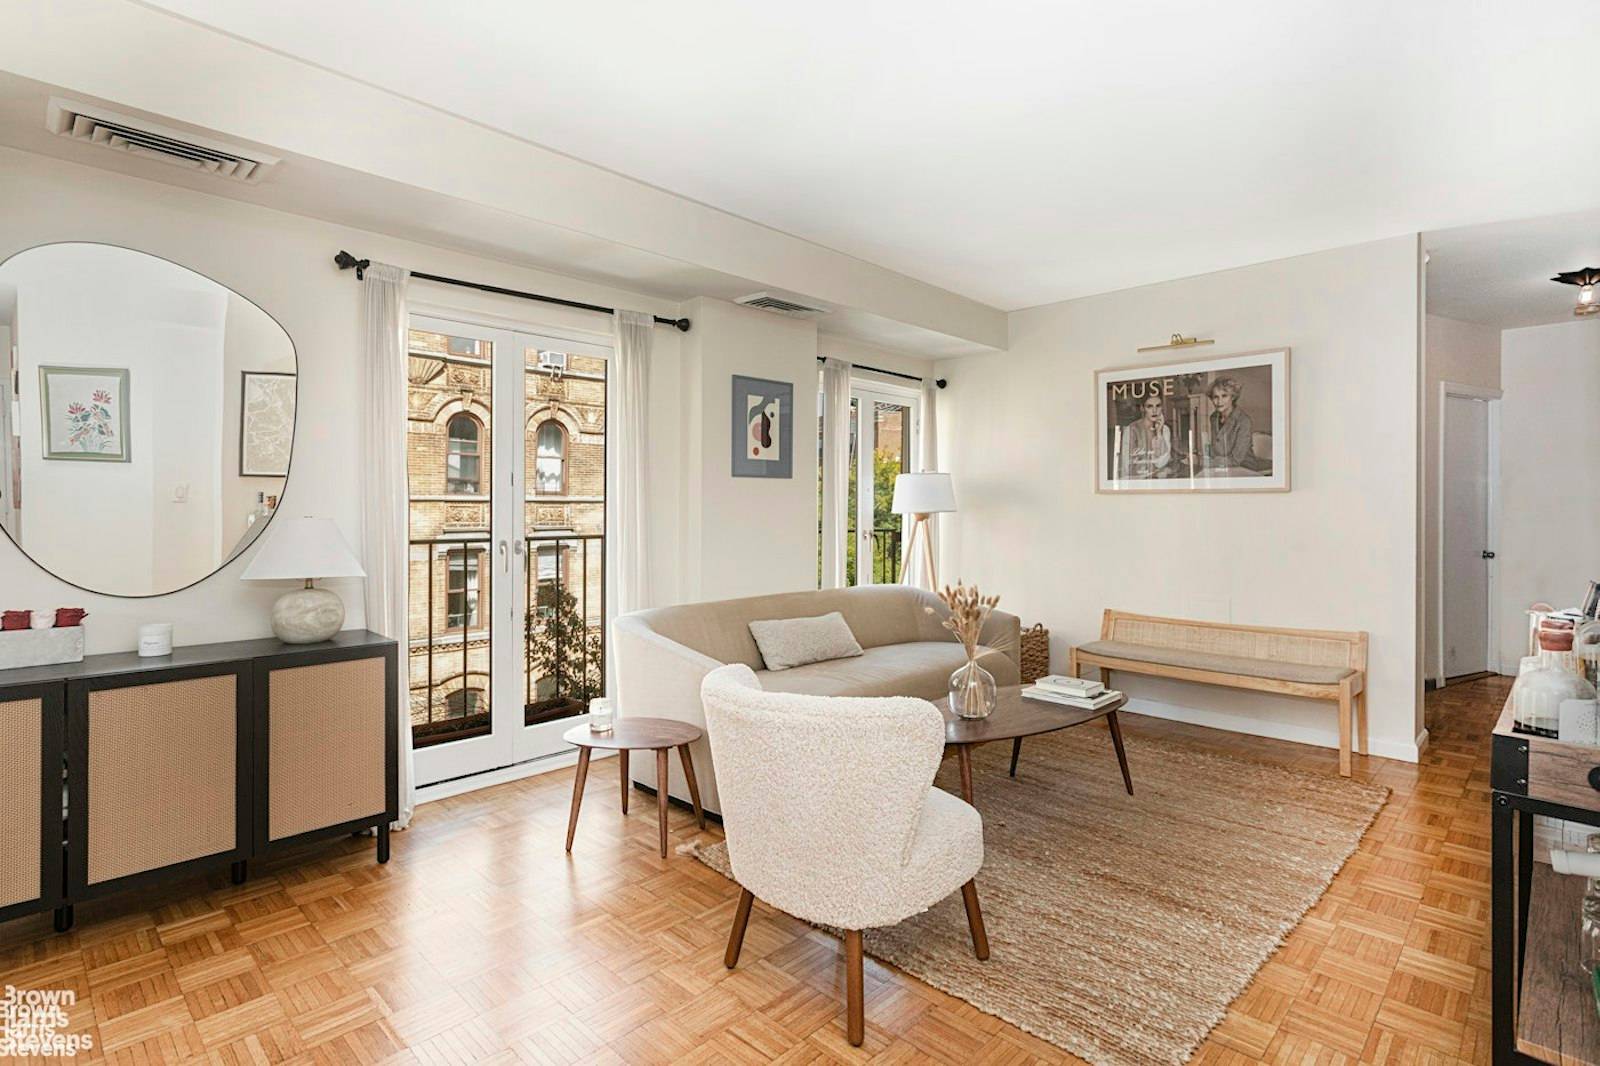 This true 2 bedroom, 2 bathroom apartment is located in the heart of the West Village and has everything you would want from a Village apartment two equal sized bedrooms, ...